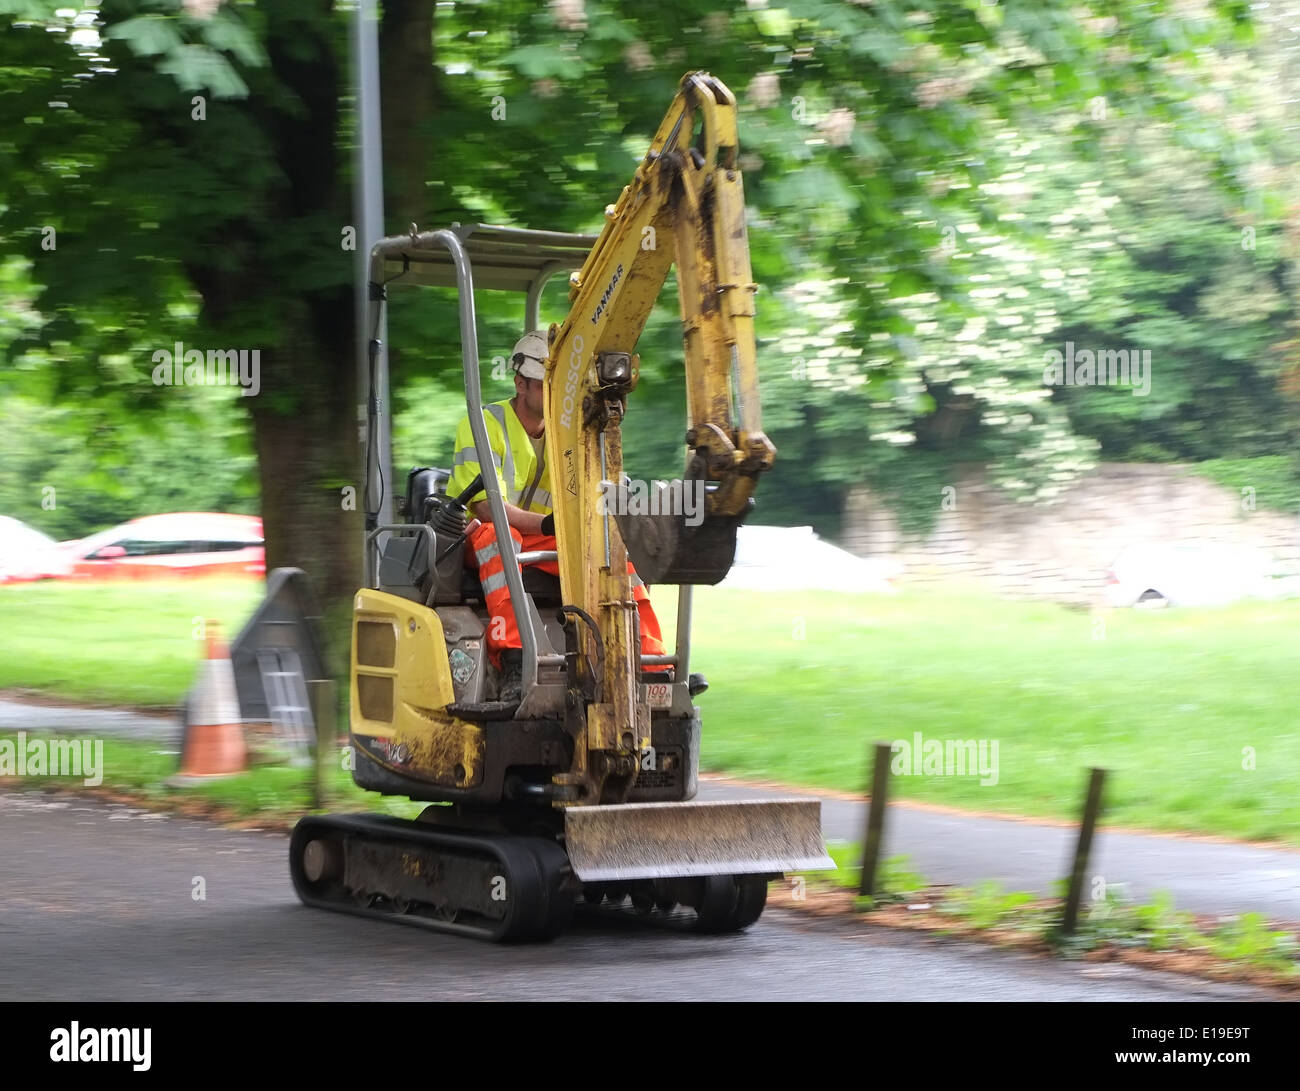 Mini digger excavator traveling up early morning prior to the start of the days work. 22 May 2014 Stock Photo